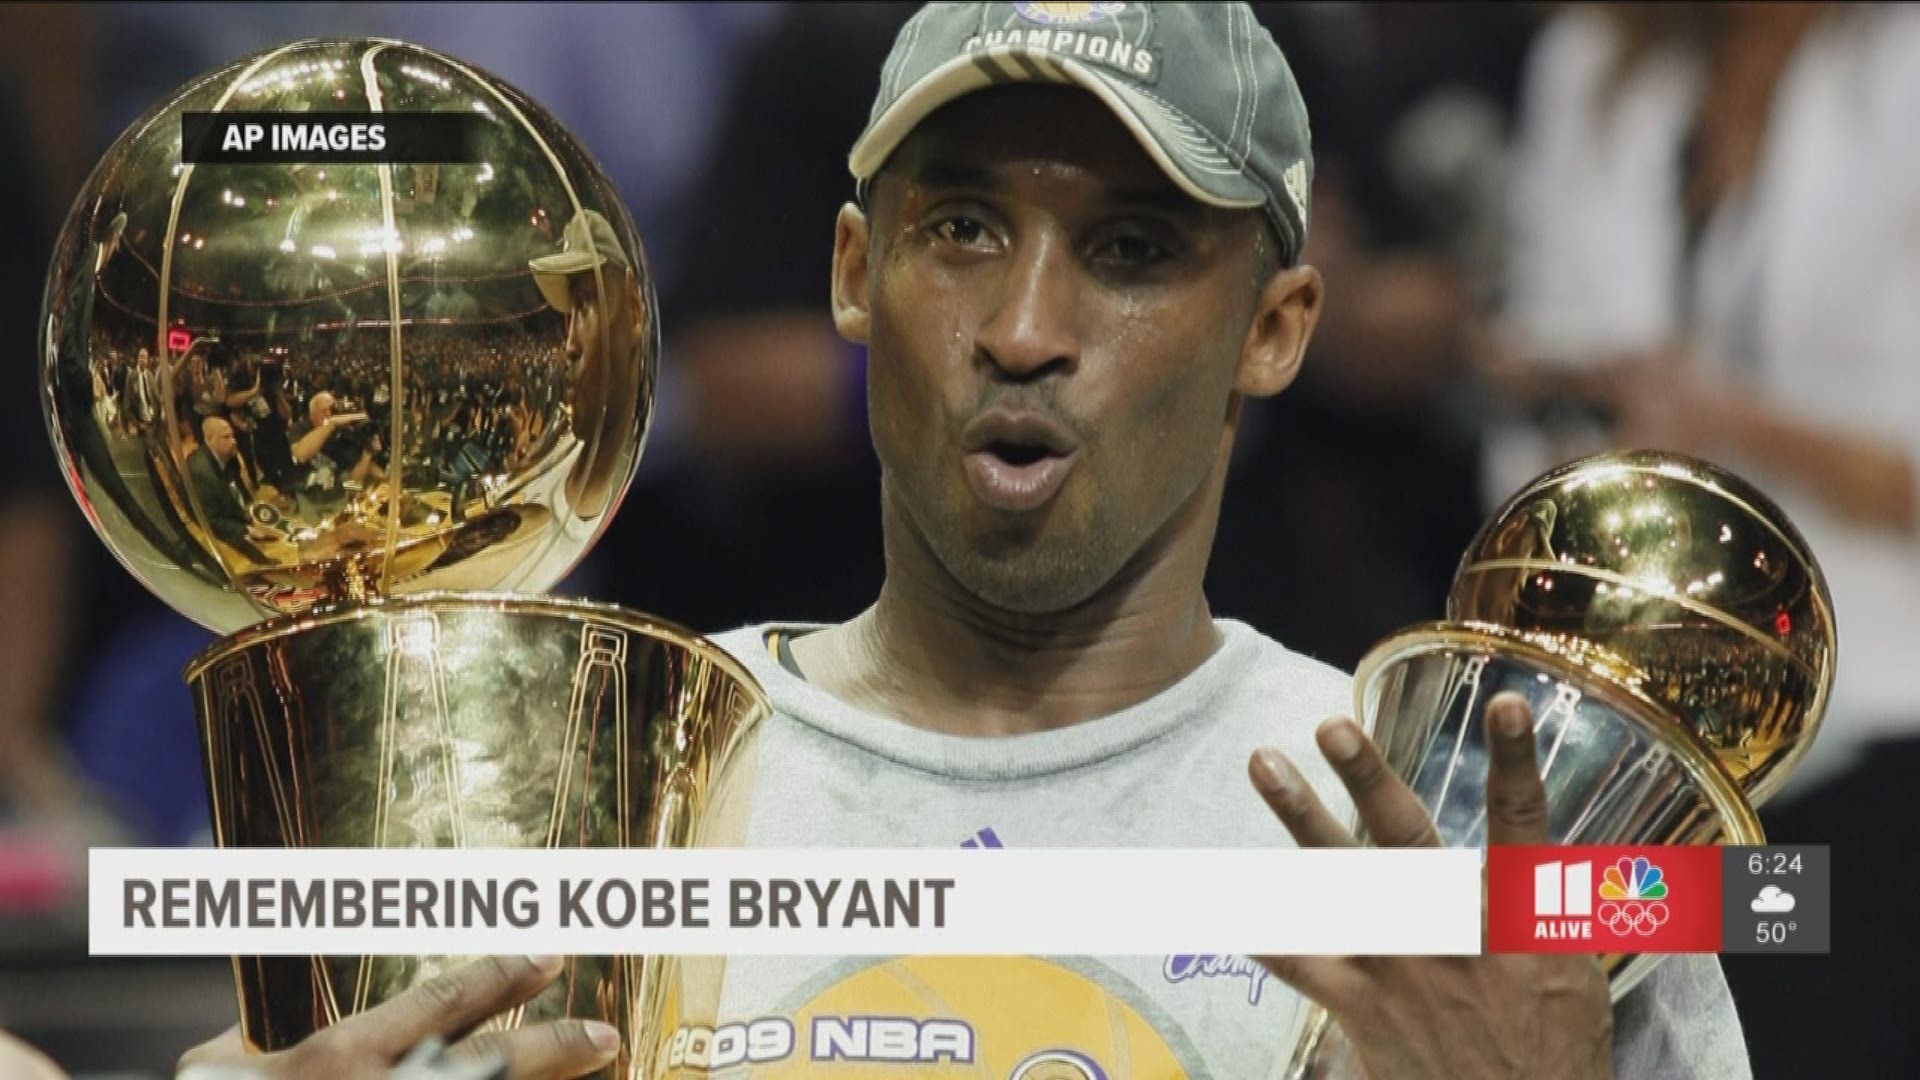 Alex Glaze shares why Kobe will be remembered as one of the best of all time.